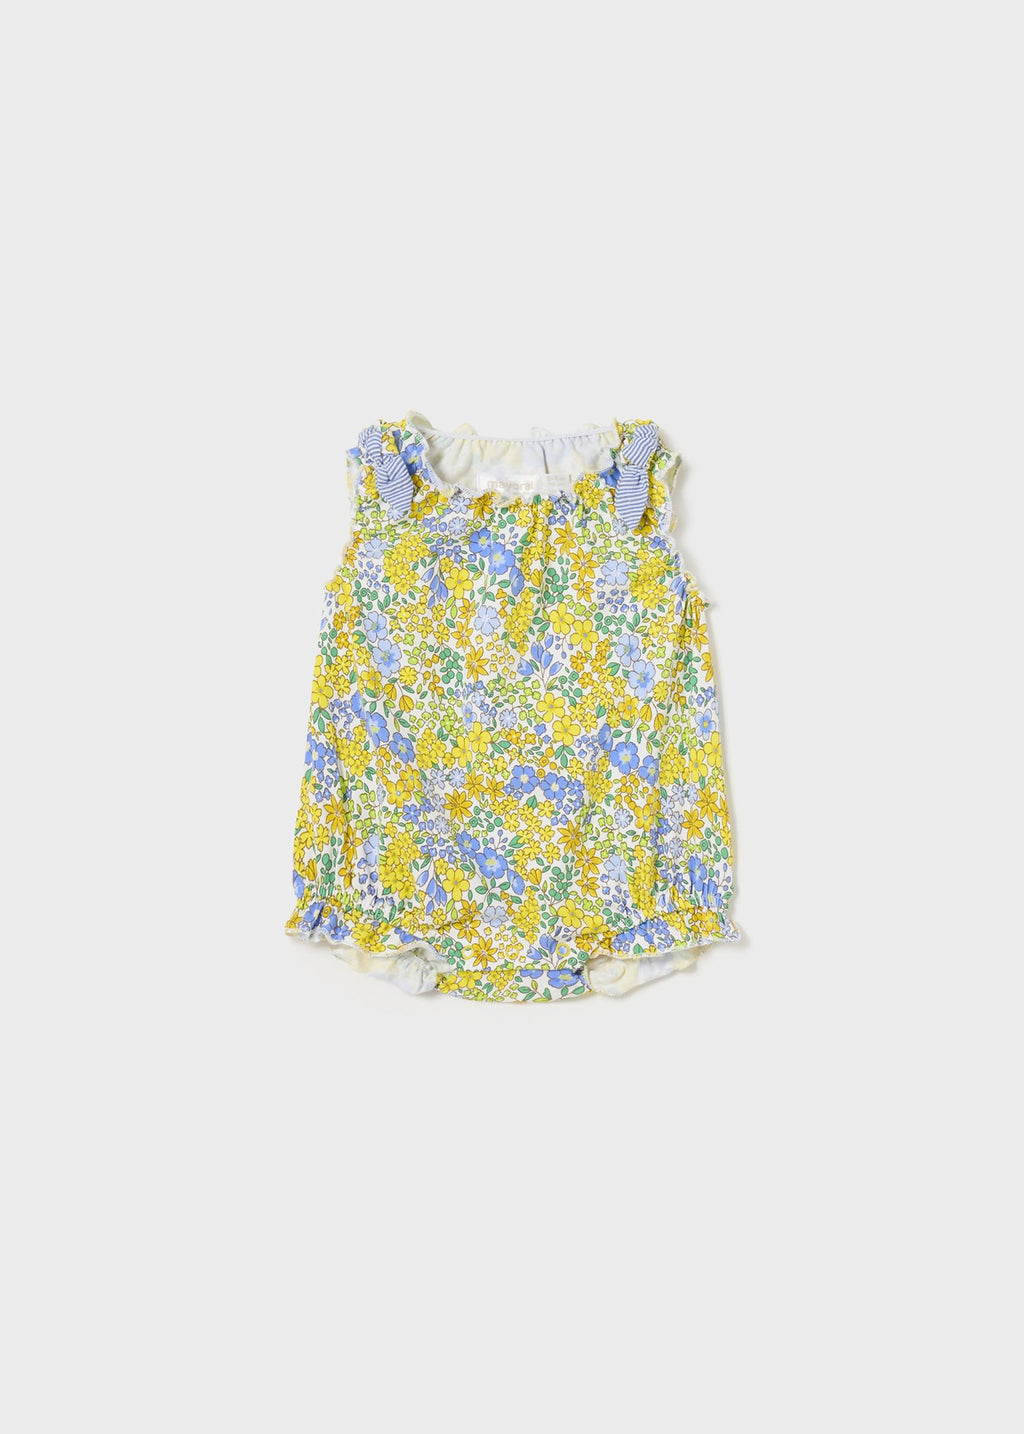 Blue & Yellow Floral Romper